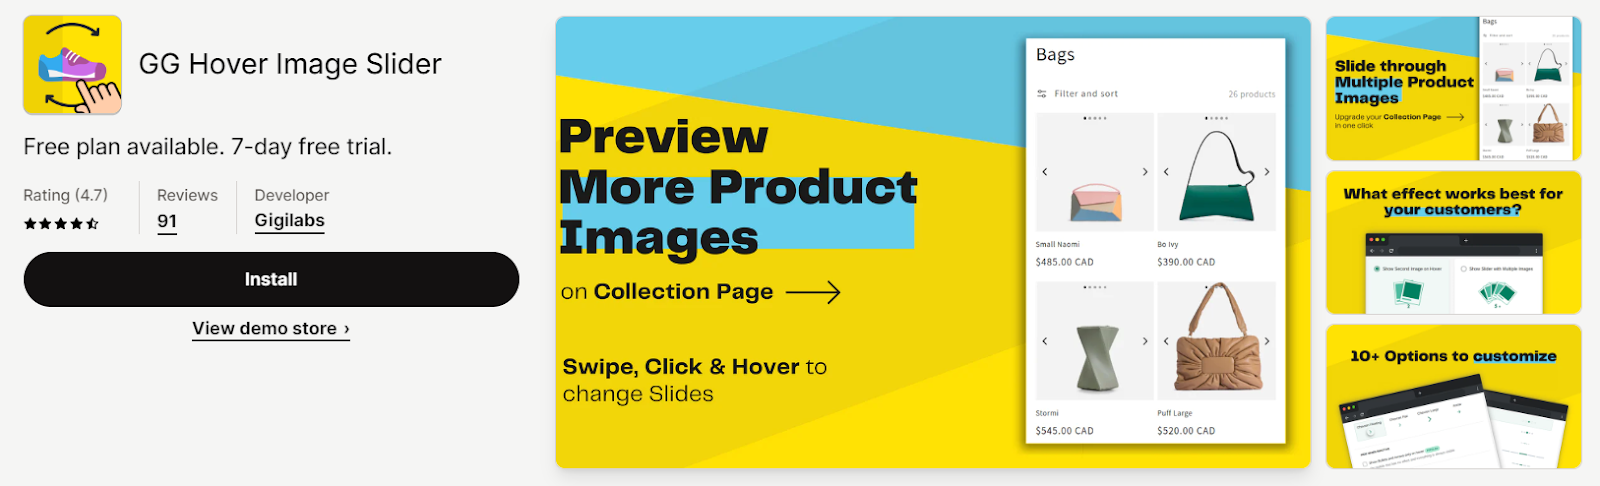 Shopify home page for GG Hover Image Slider